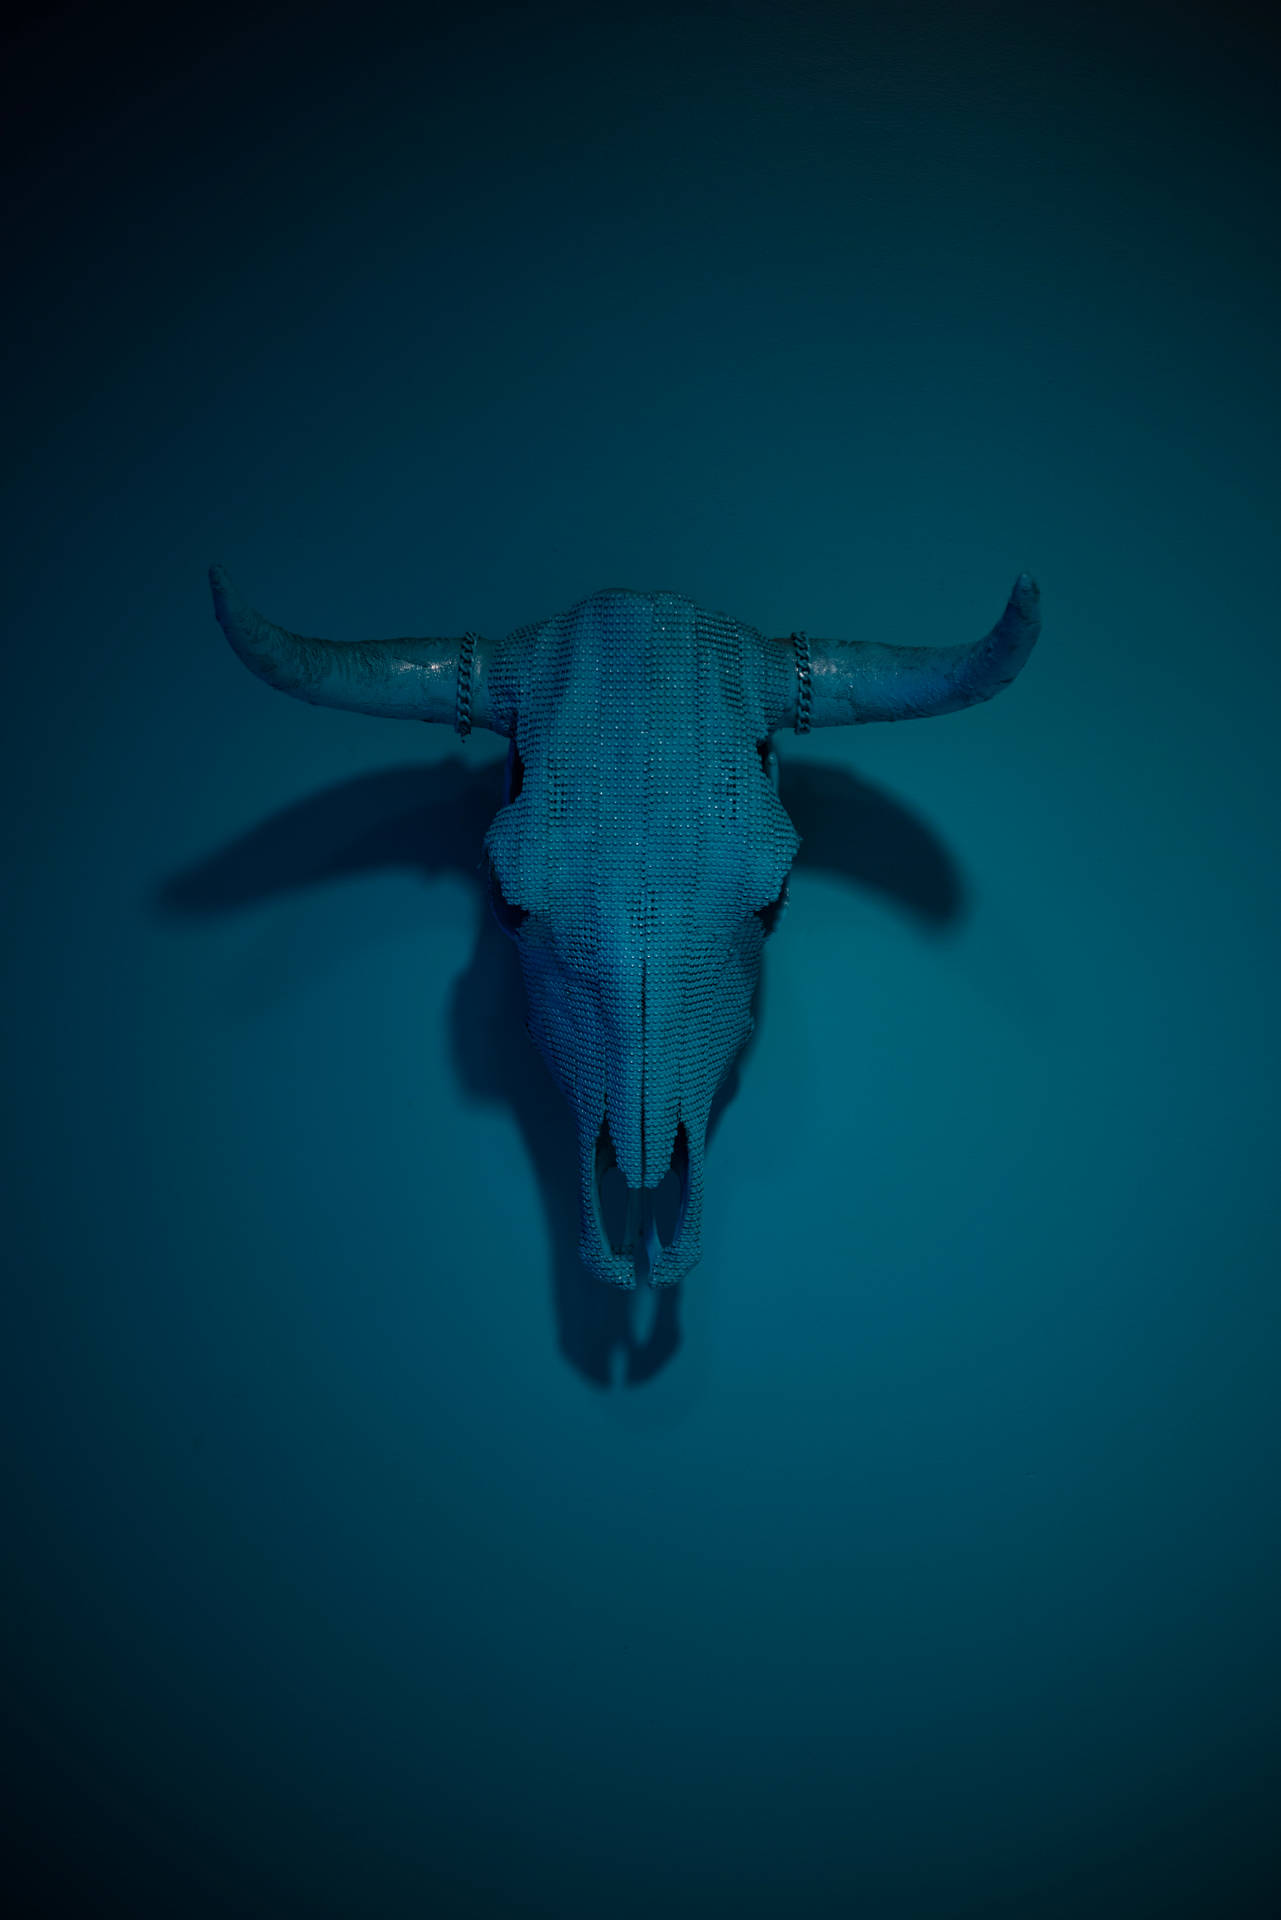 Scary Skulls Of A Bull On Wall